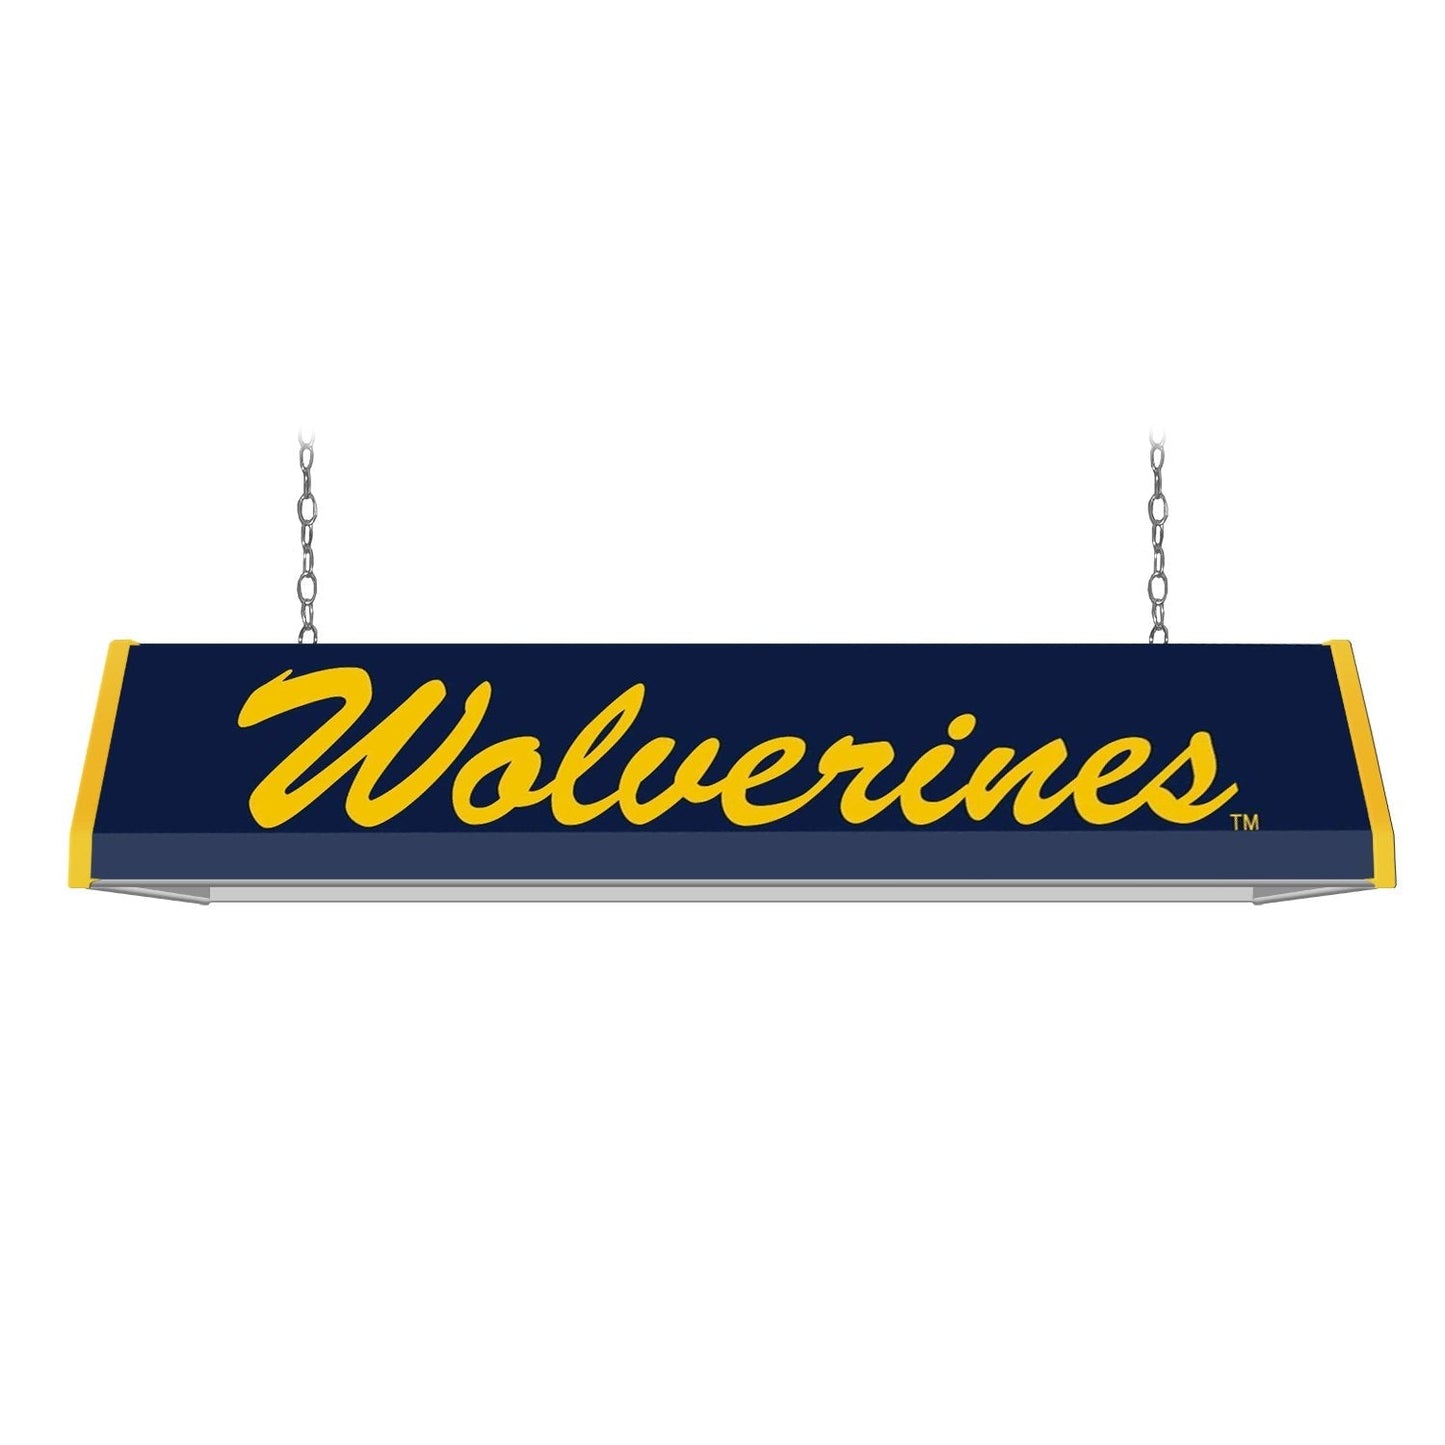 Michigan Wolverines: Wolverines - Standard Pool Table Light - The Fan-Brand